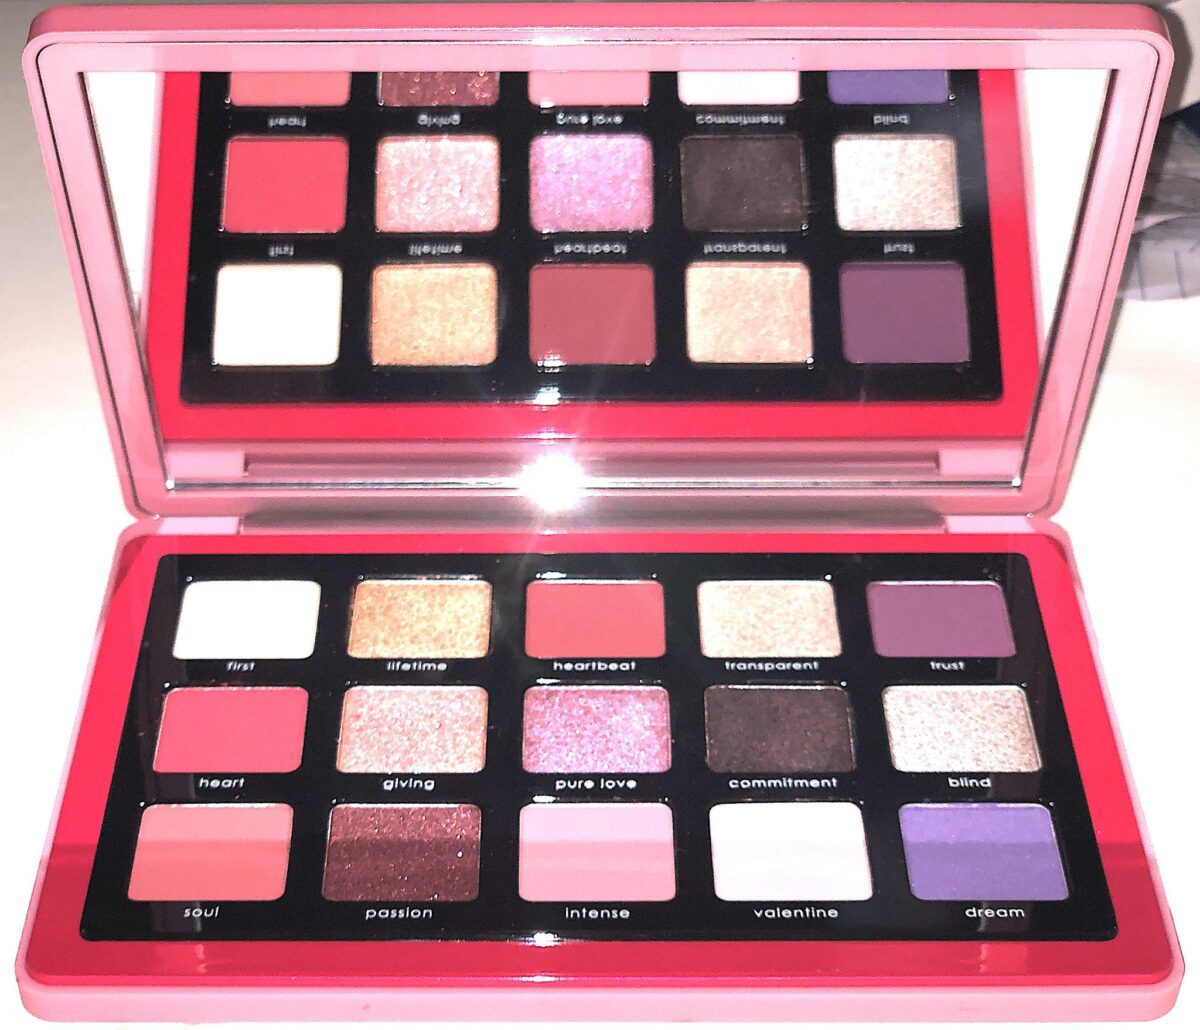 INSIDE THE LOVE PALETTE IS A HUGE MIRROR AND 15 EYESHADOW PANS